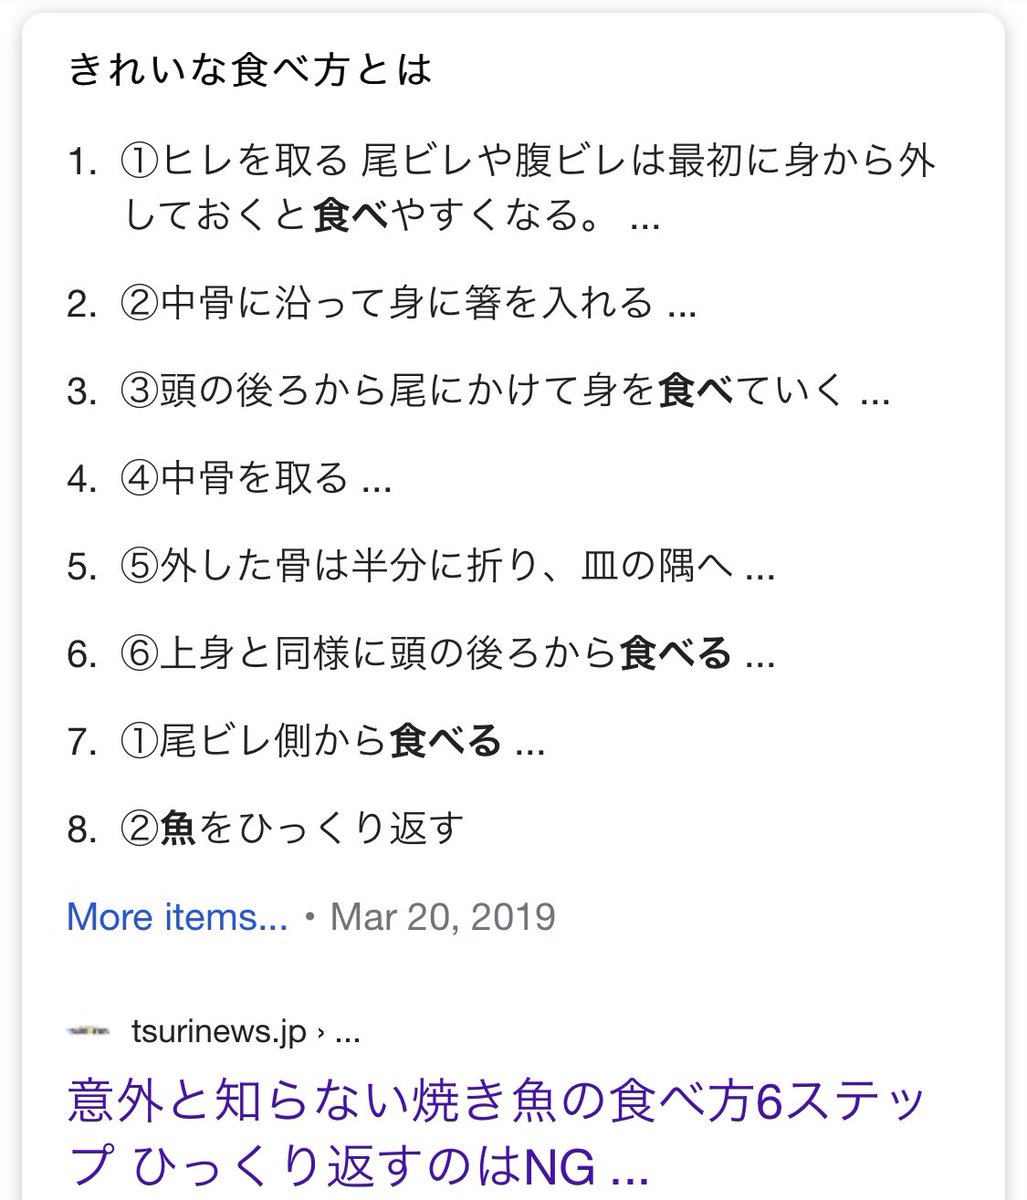 Okay first of all eating fish that’s not deboned with a CHOPSTICK is mentally draining even for ppl who are used to chopstickIf you googled [綺麗な魚食べ方] or “how to eat fish cleanly” you will find step by step instruction of how to and what not to do  #bakugoufacts